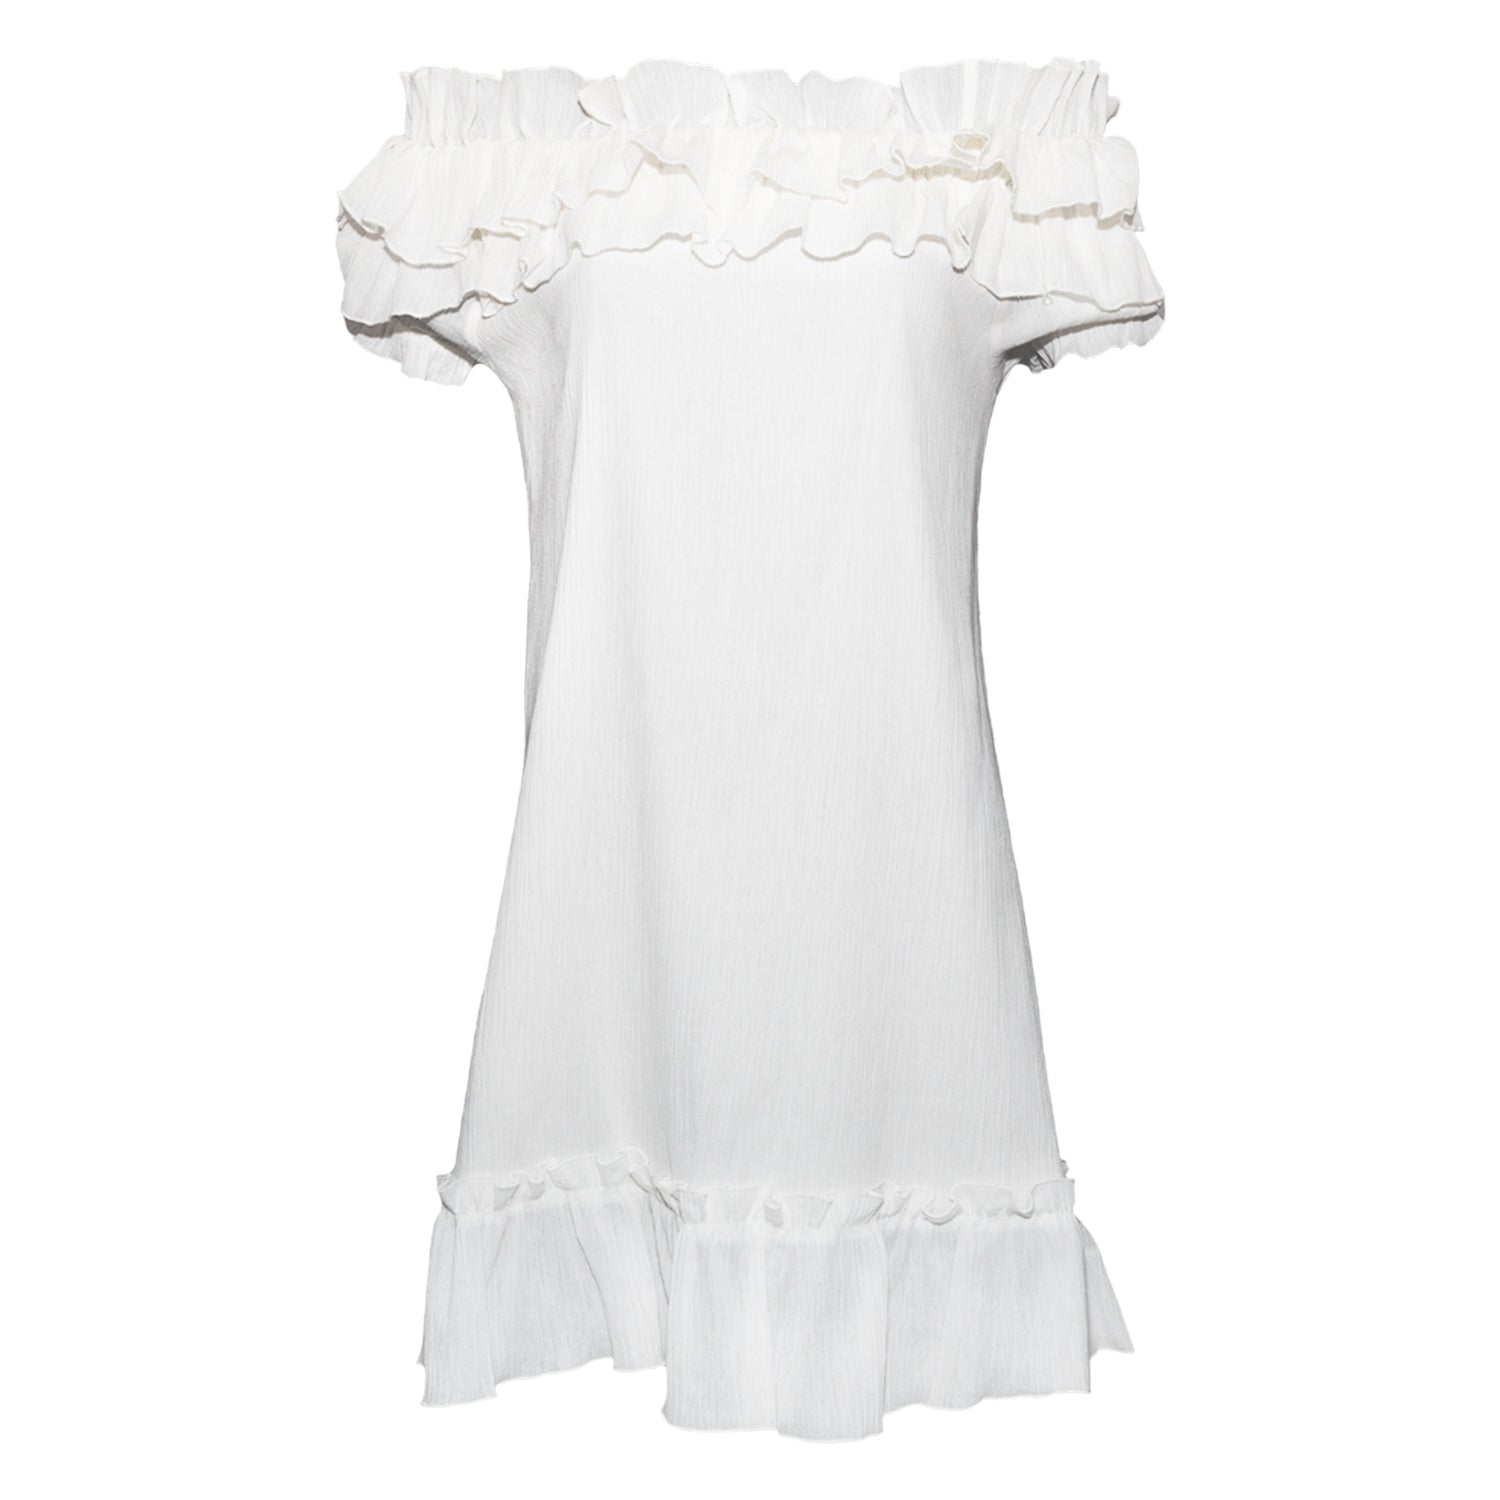 Resort off shoulder dress with ruffles at the bottom and around shoulders and balloon sleeves in off white colour. A free flowing bodice, a fine cotton inner lining, made sustainably from European GOTS certified Organic Cotton.